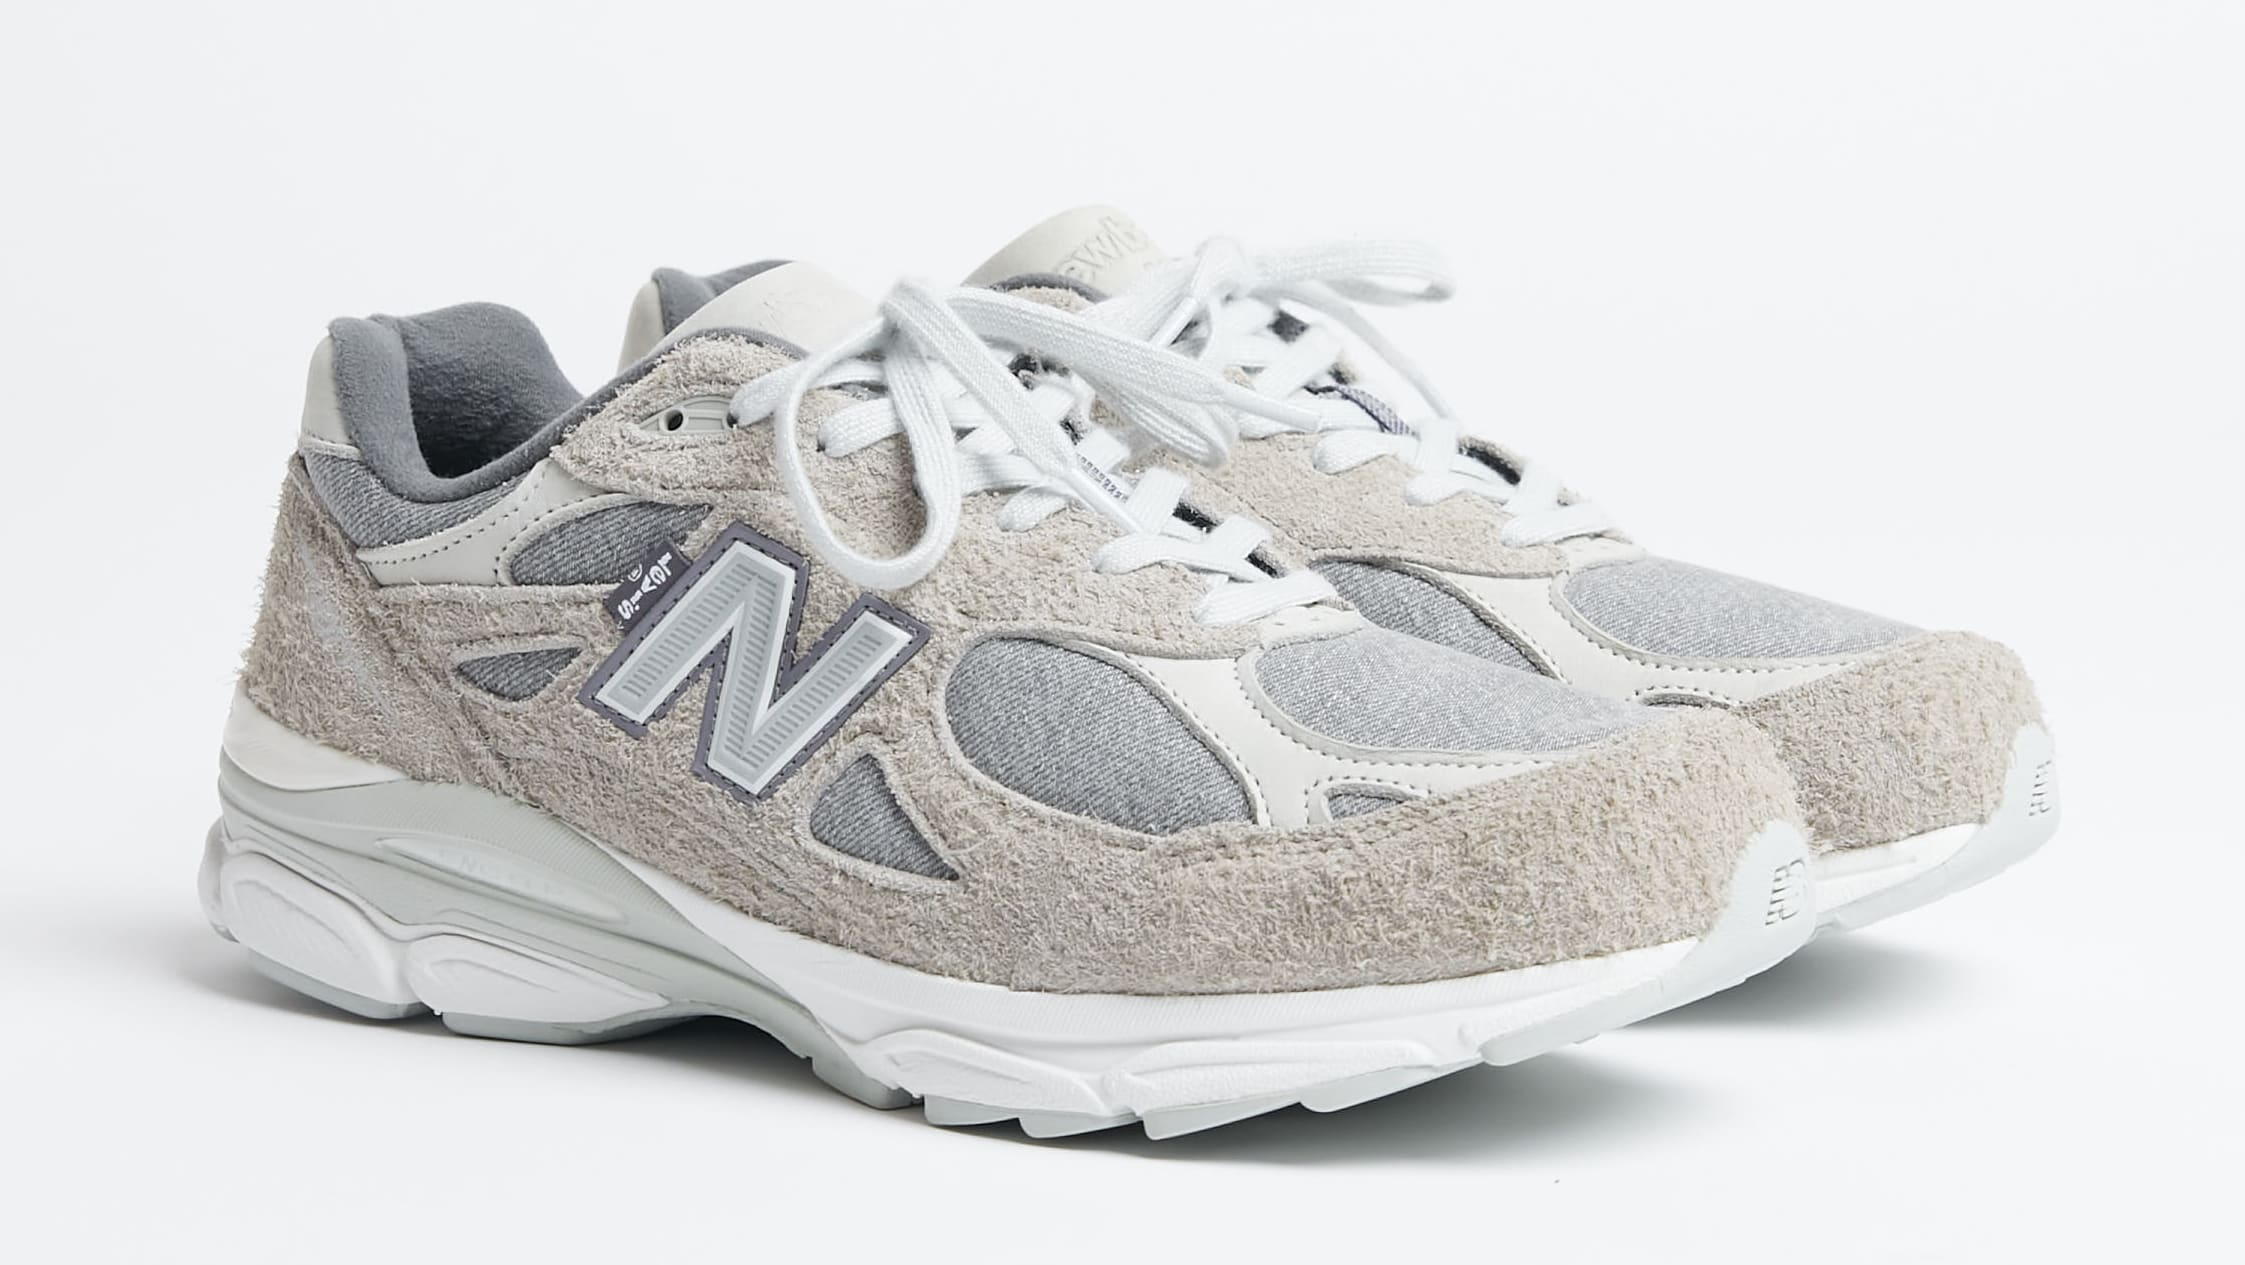 Levi's x New Balance 990v3 Sneaker Collaboration Release Date 